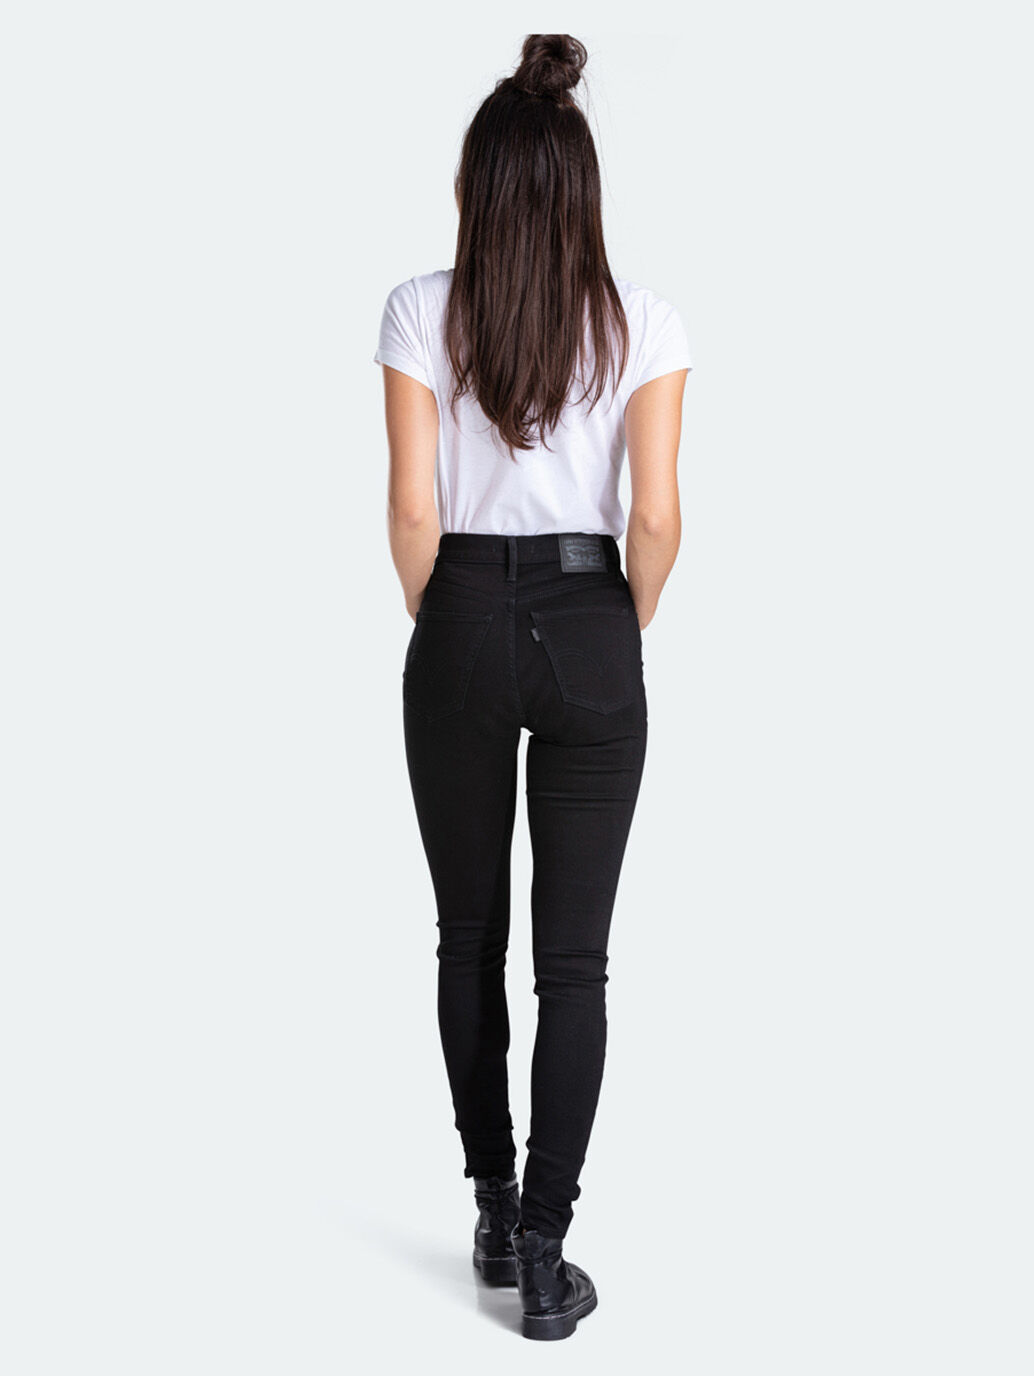 Mile High Super Skinny Jeans in New Moon